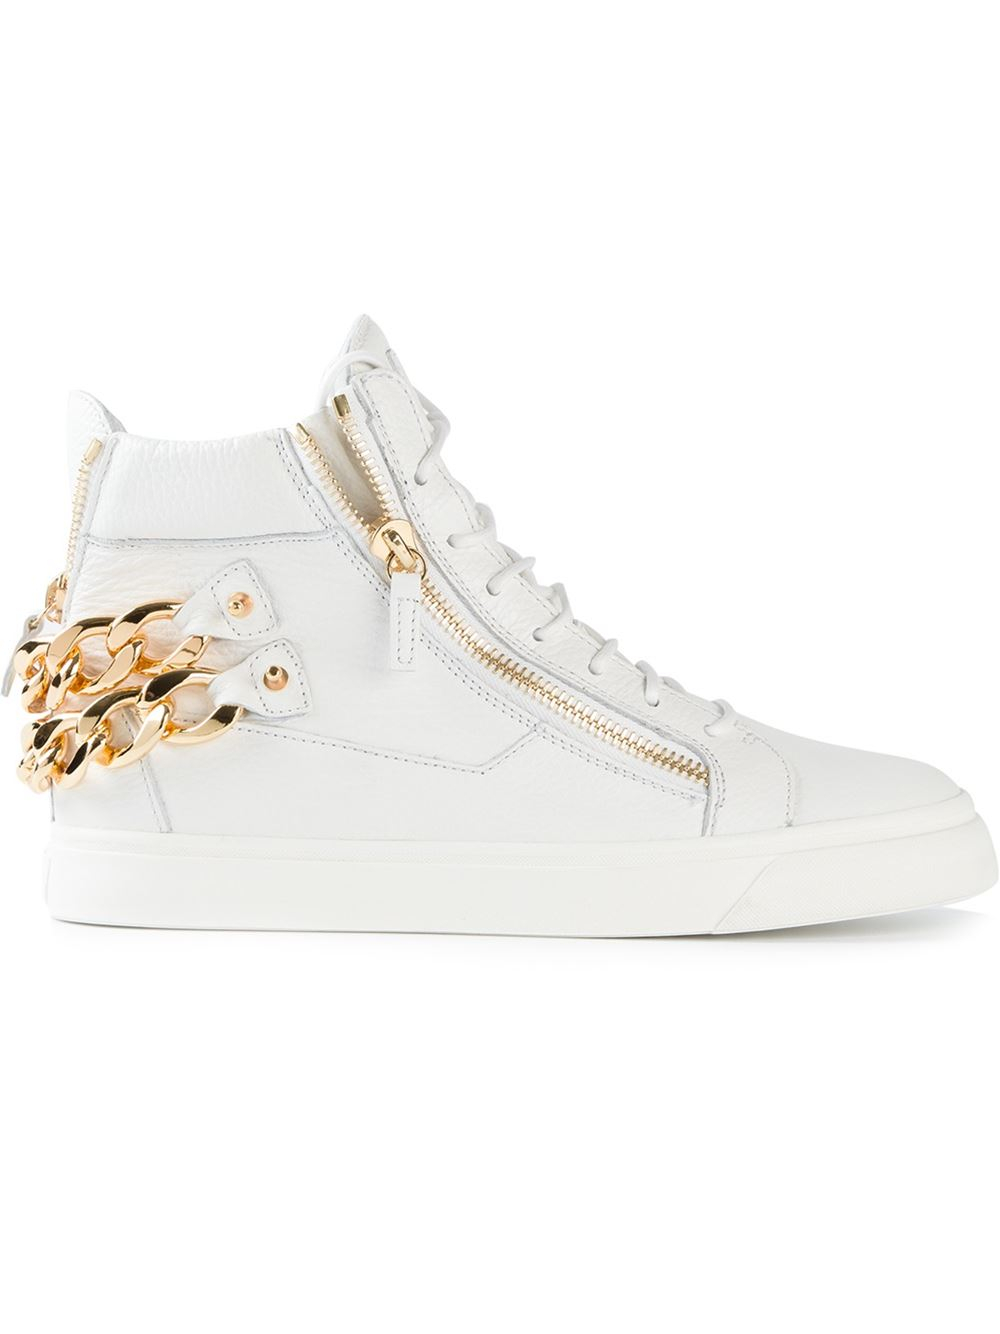 White Gold Chain Trim Detail High-Top Sneakers